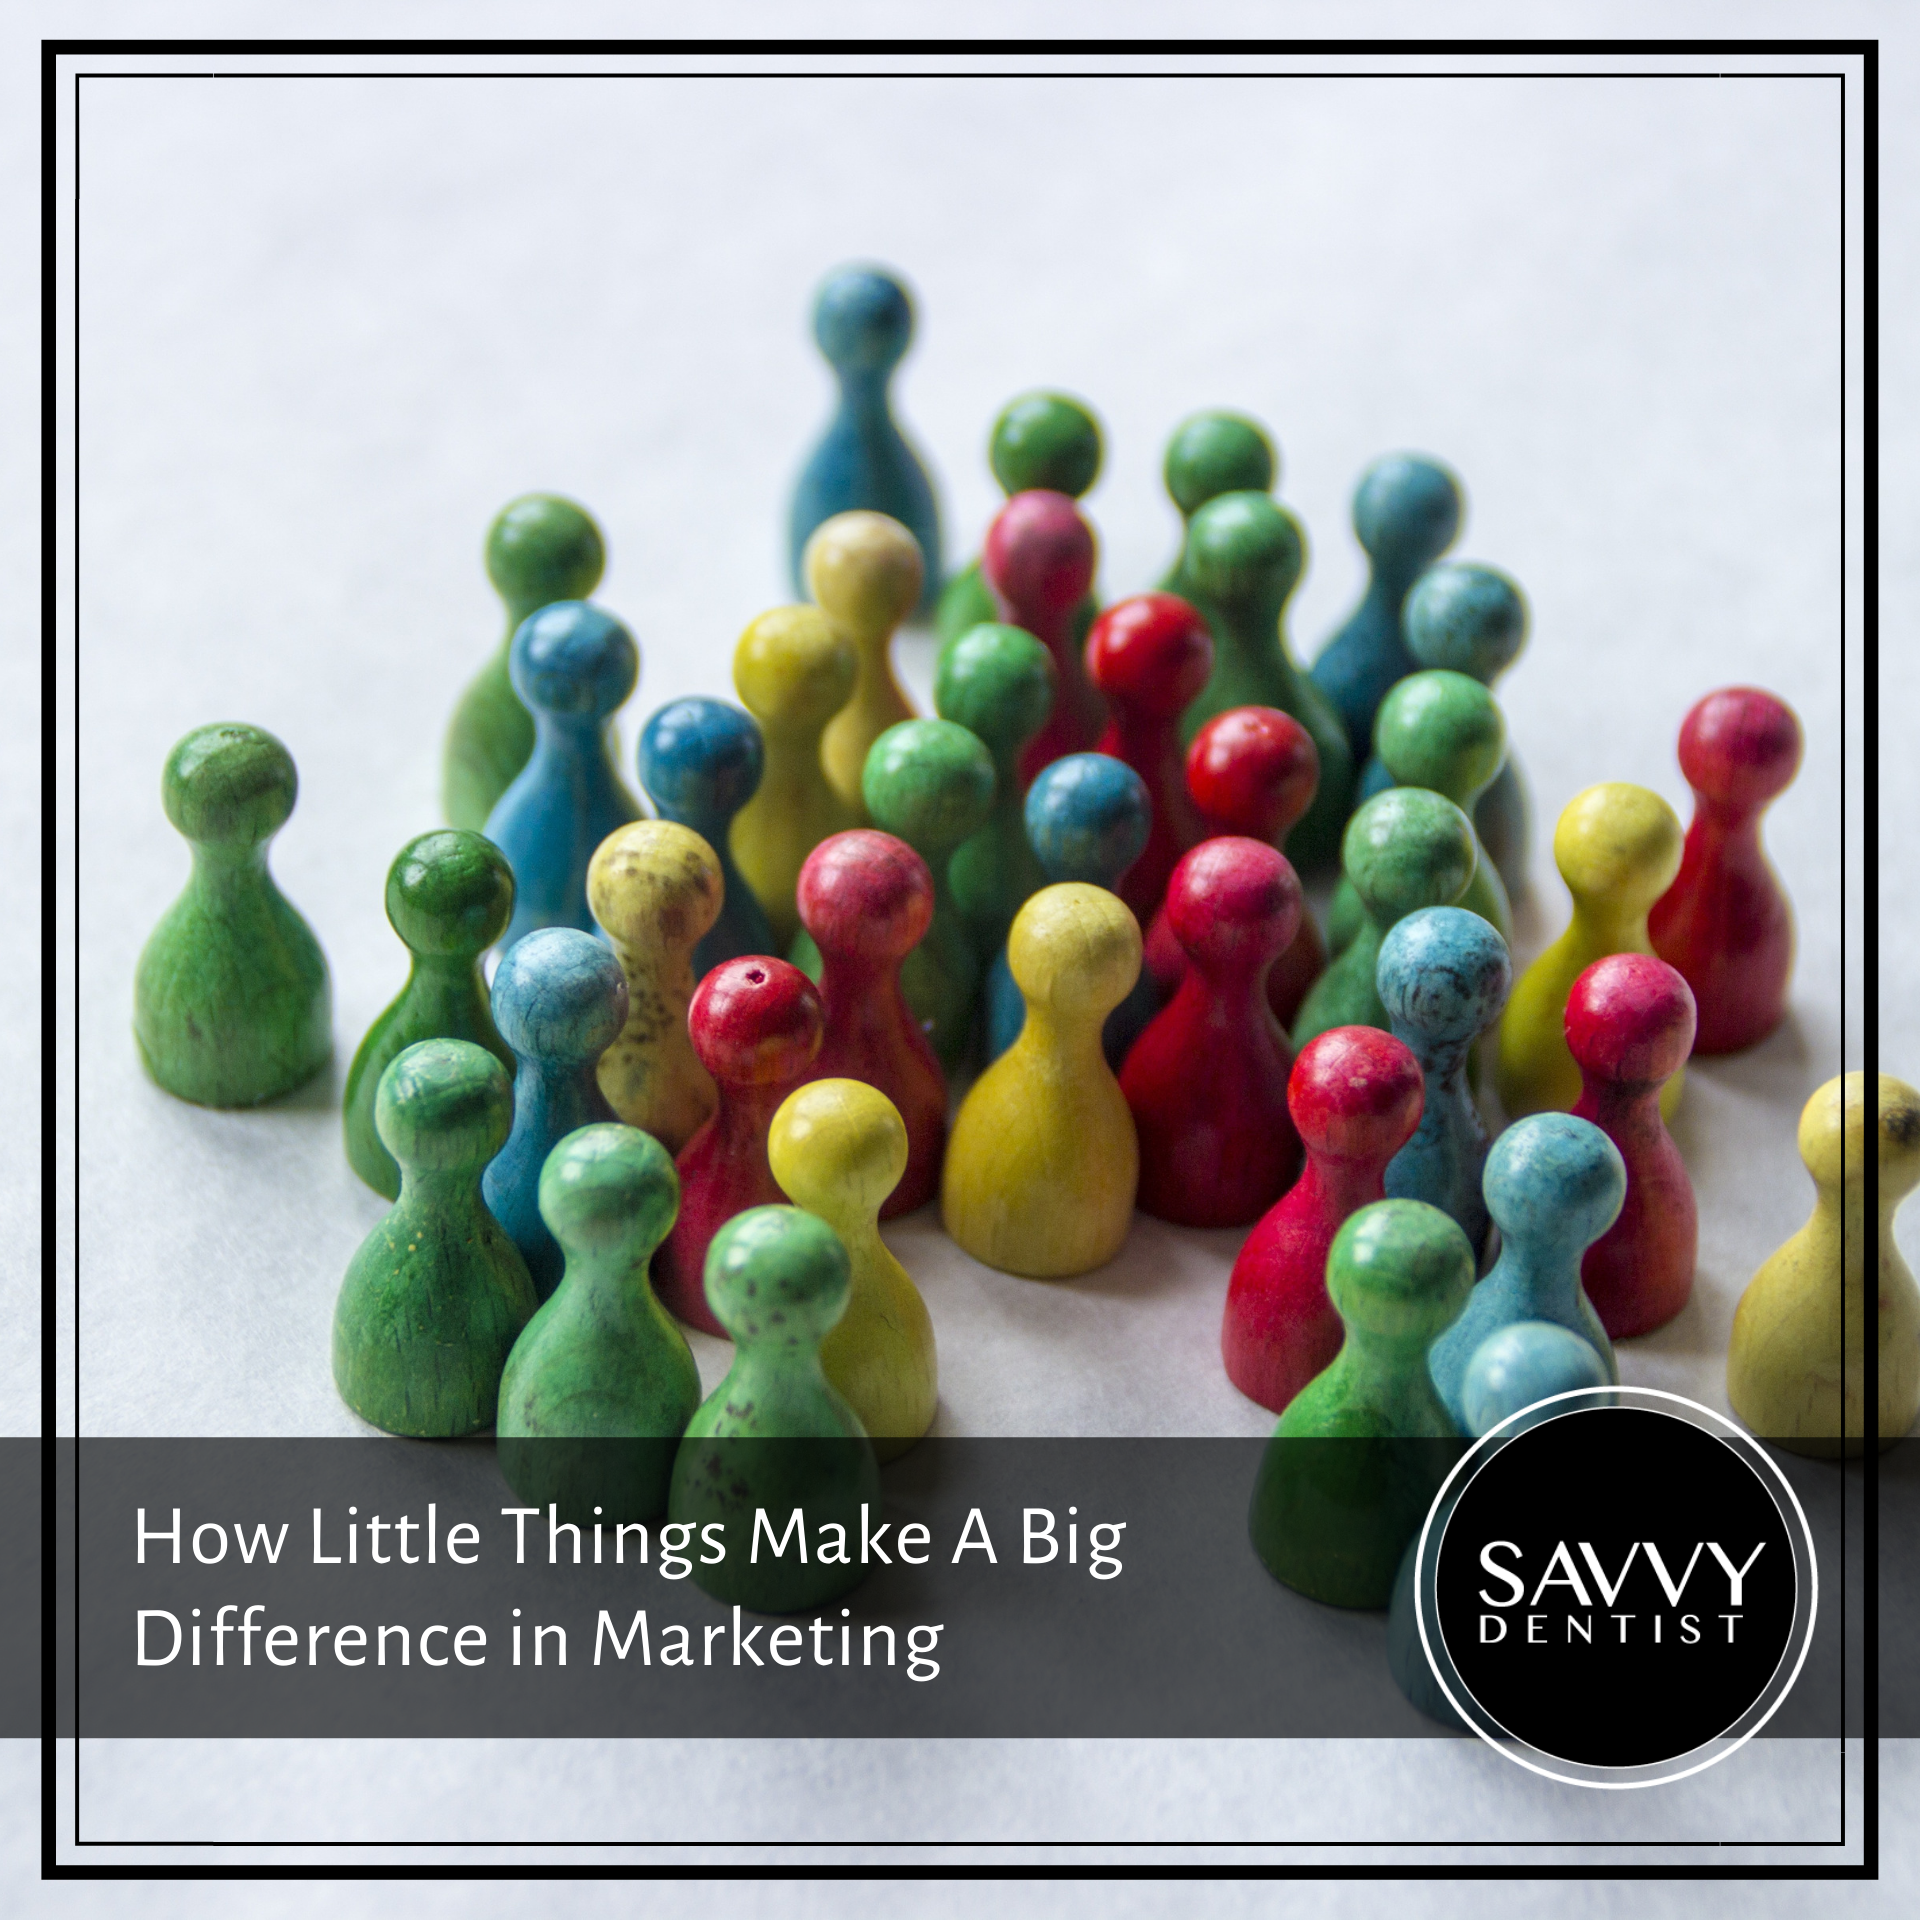 How Little Things Make A Big Difference in Marketing